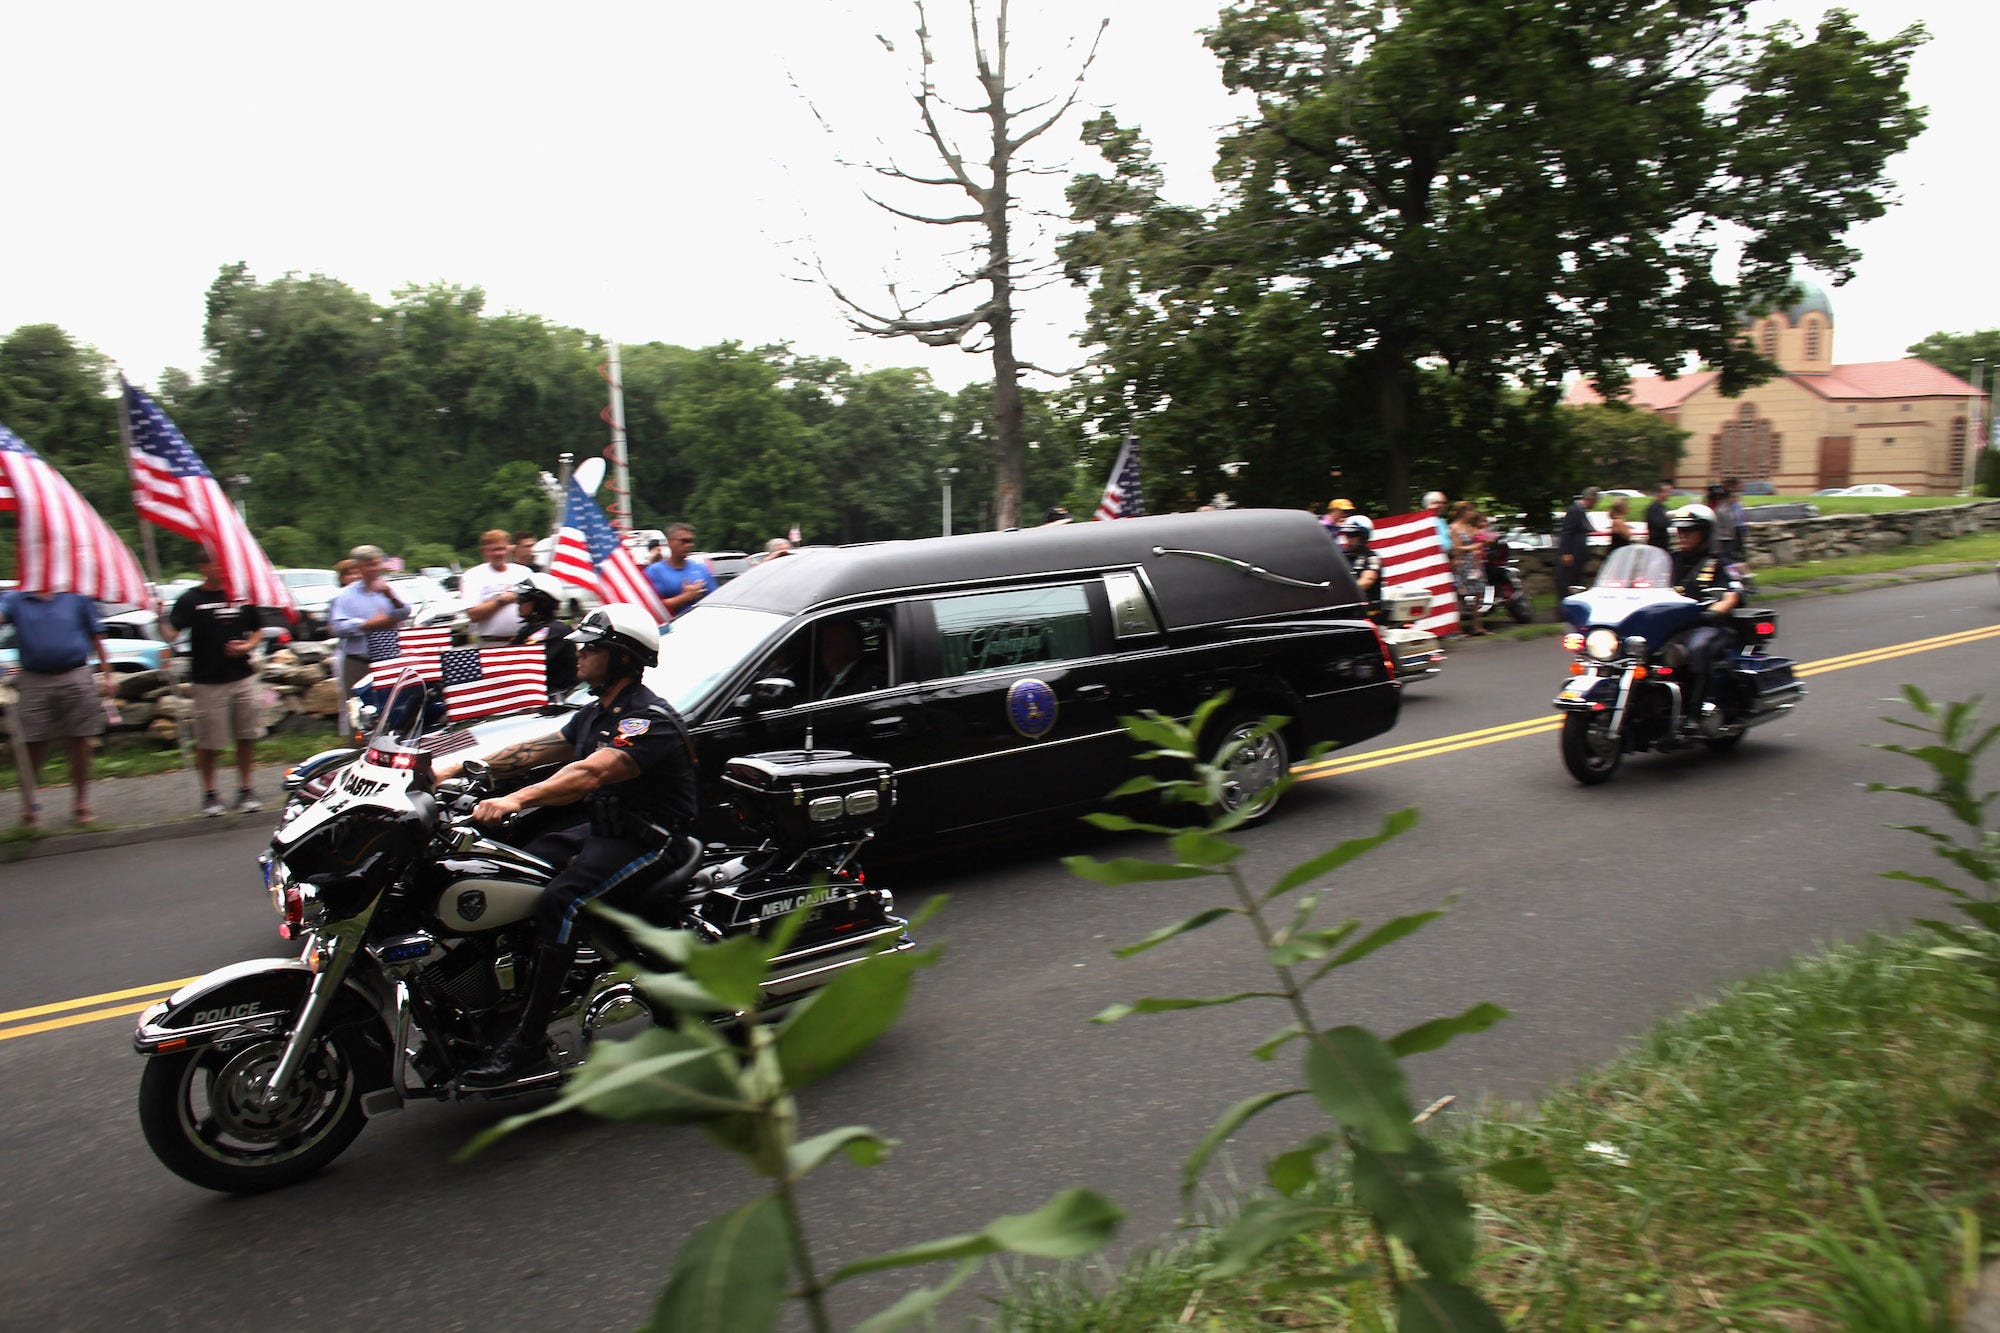 Navy SEAL Extortion 17 hearse funeral